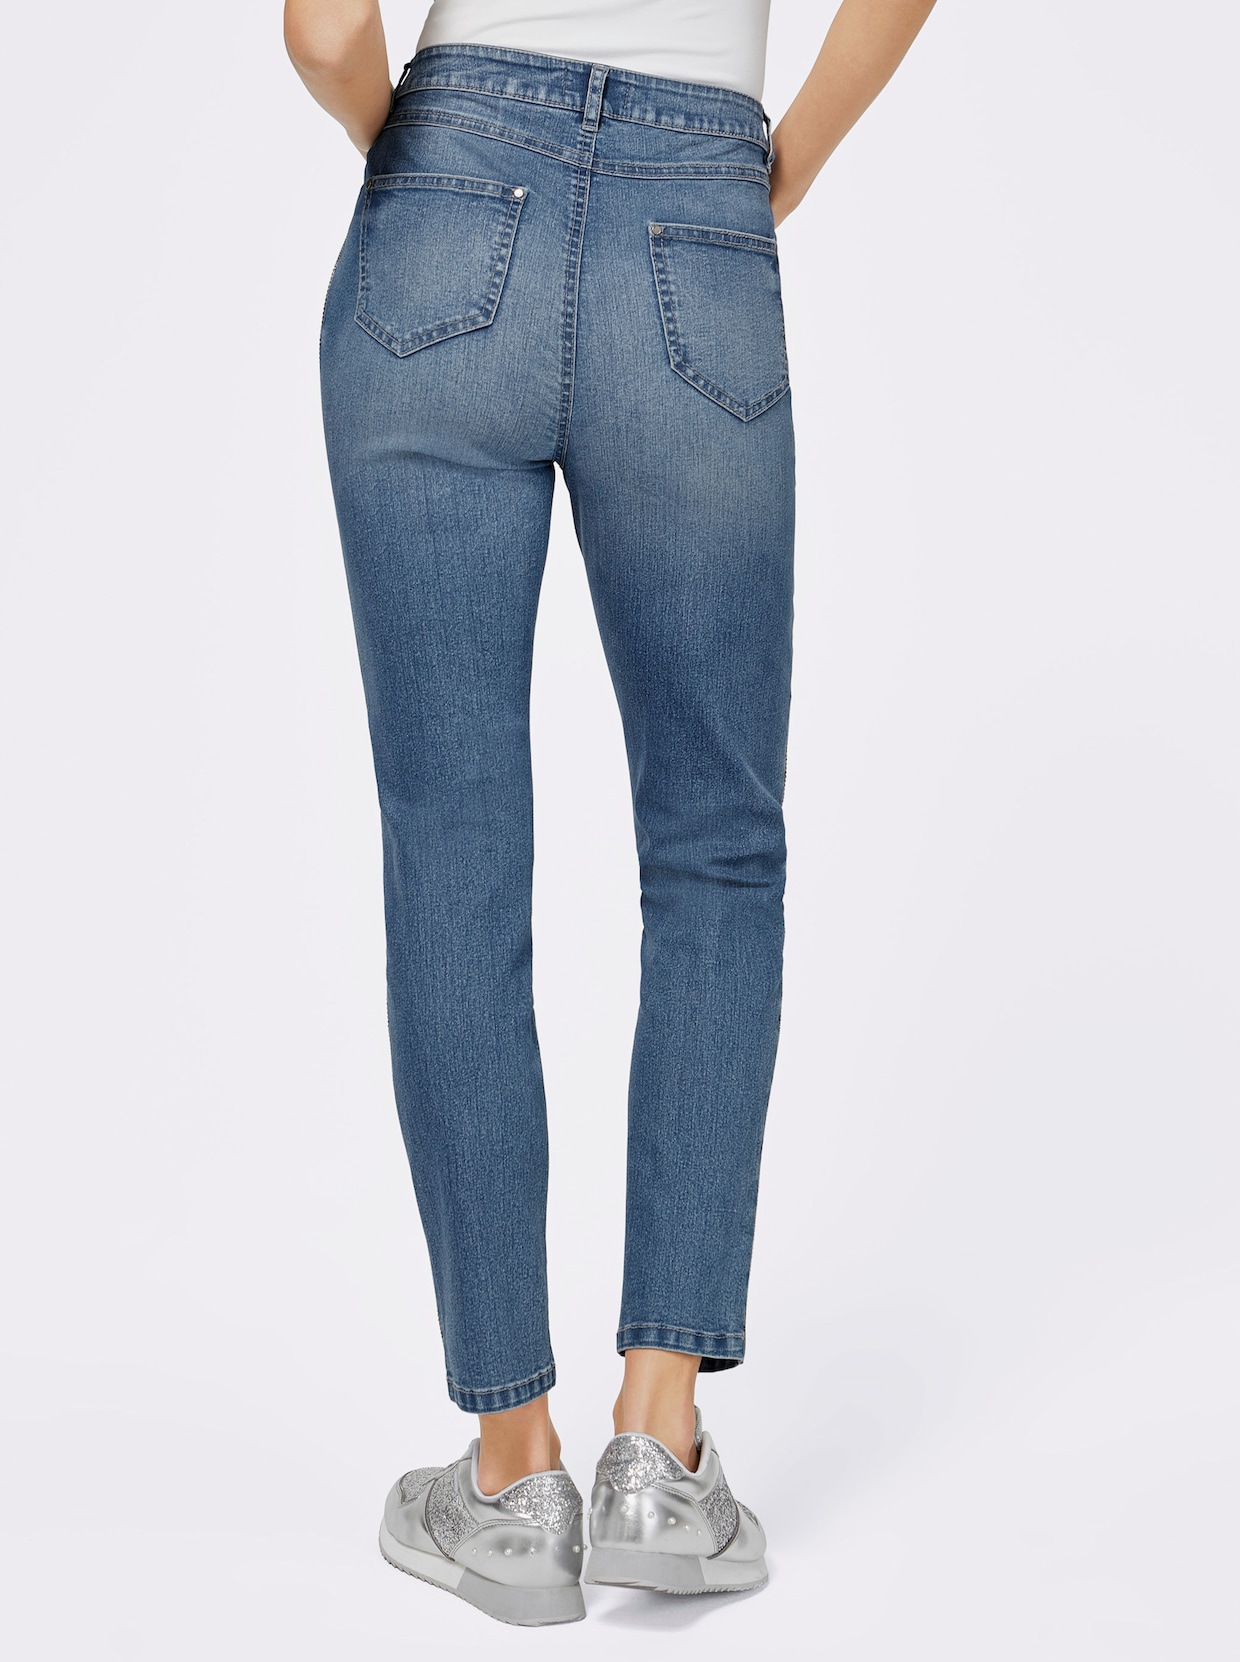 Gerade Jeans - blue-stone-washed